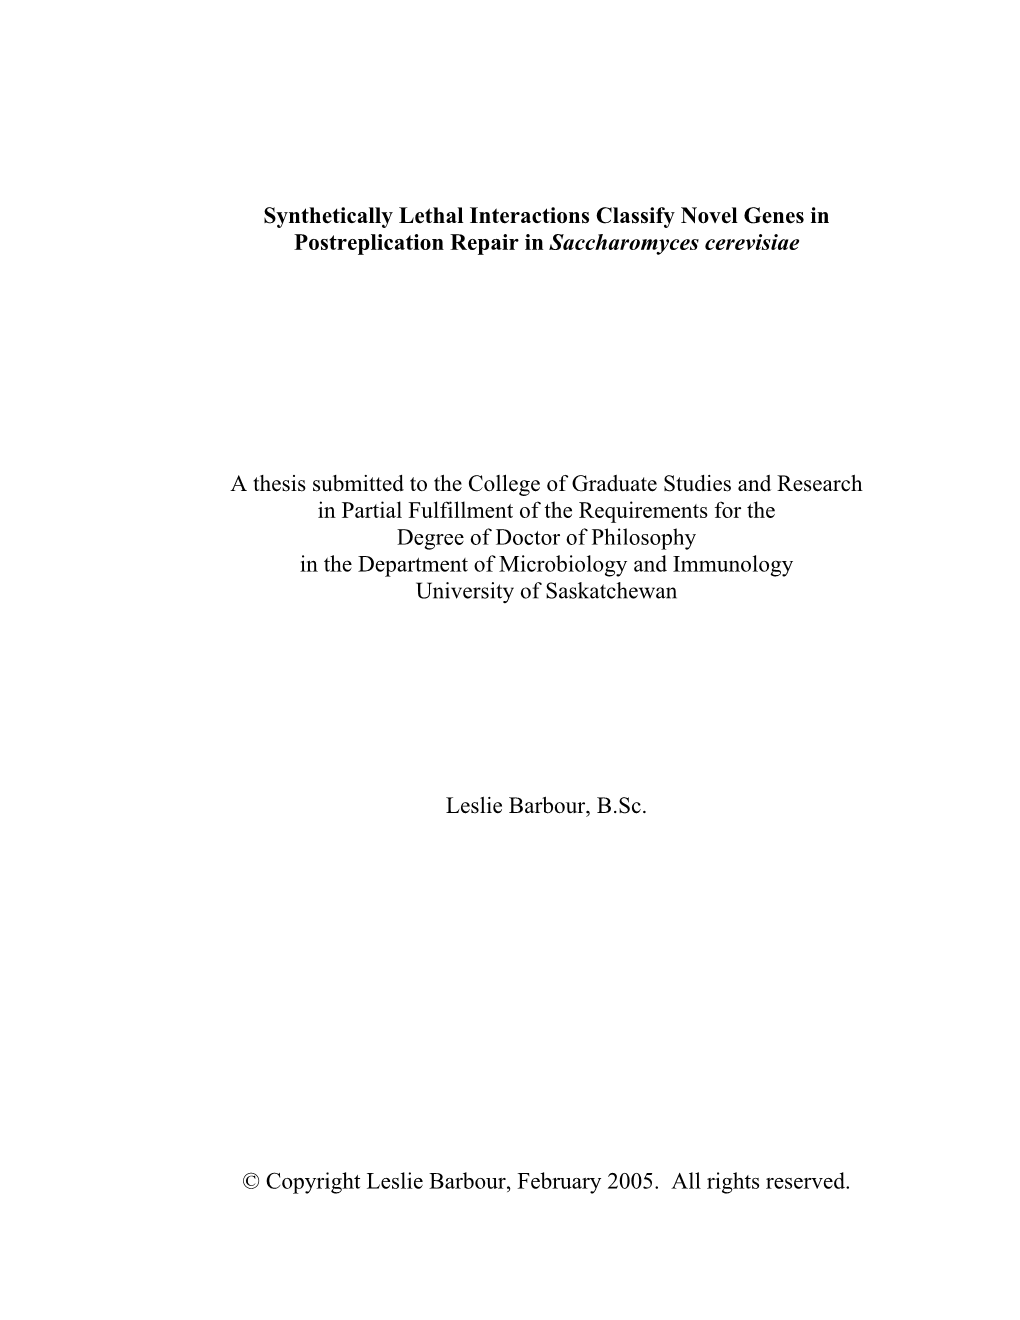 Barbour-Thesis.Pdf (2.004Mb)